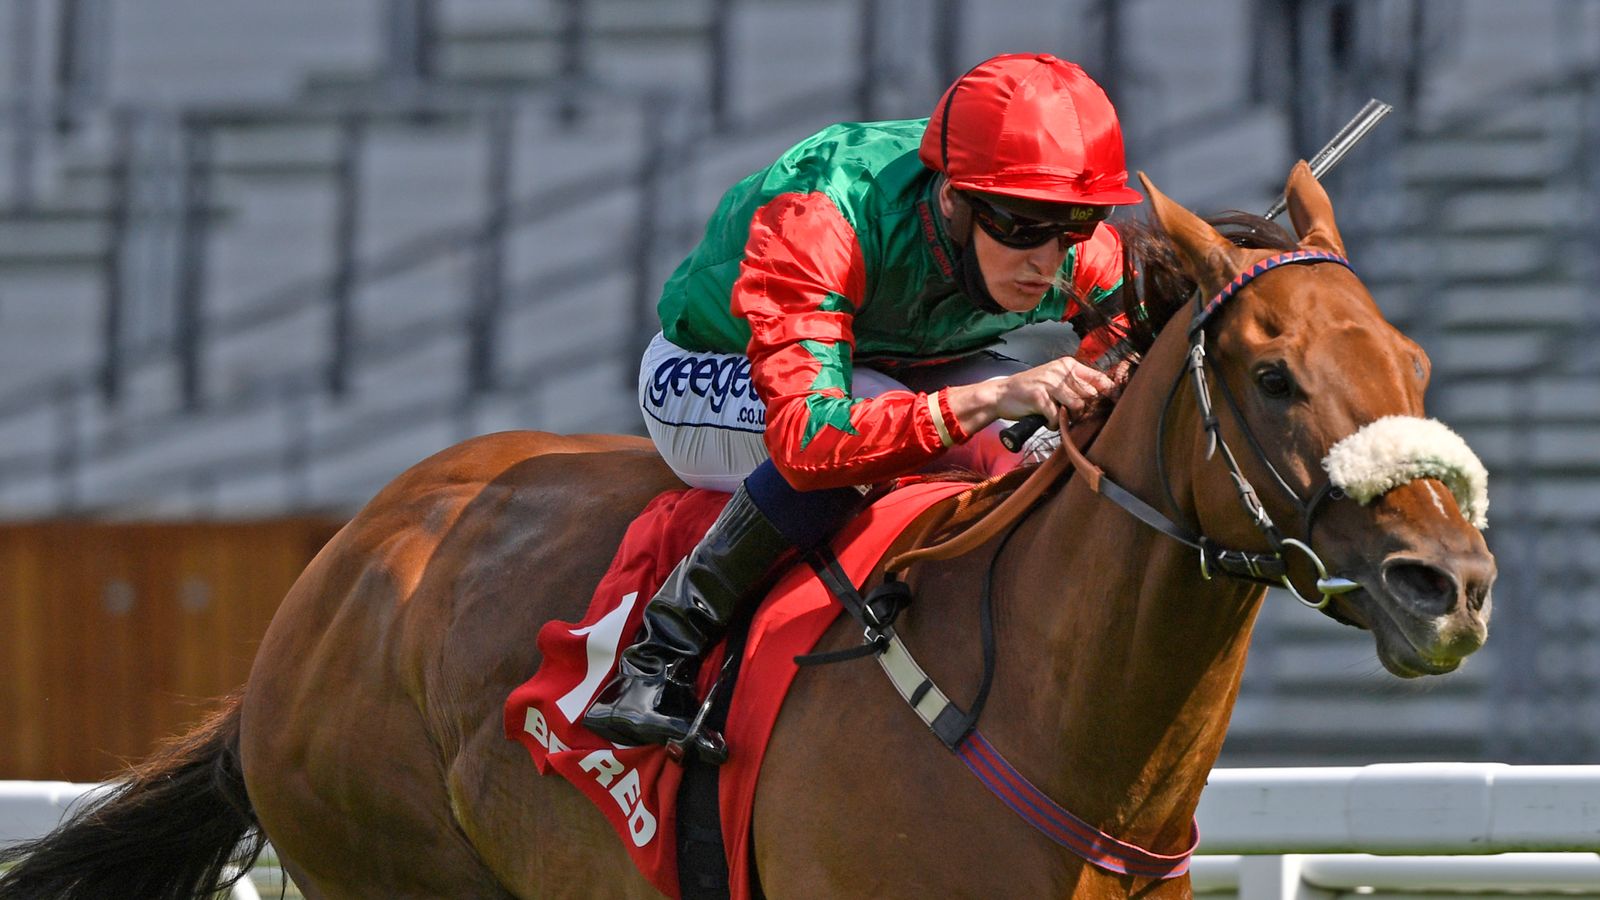 Today on Sky Sports Racing: Doncaster legend Jawwaal looks for repeat victory as William Buick rides Charlie Appleby debutant